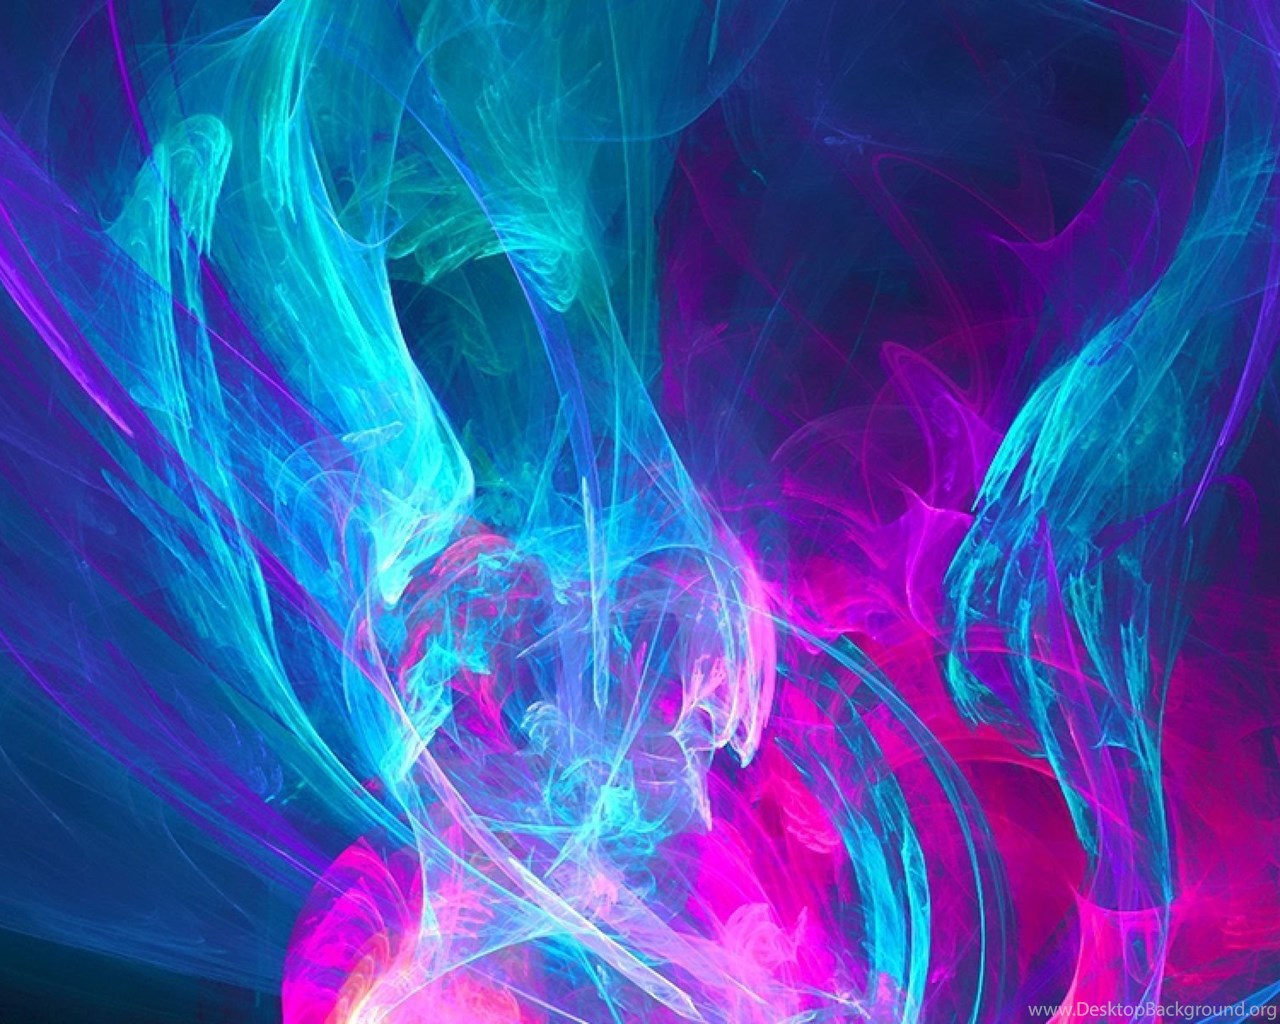 Download Wallpapers 3840x1200 Abstraction, Light, Pink ...